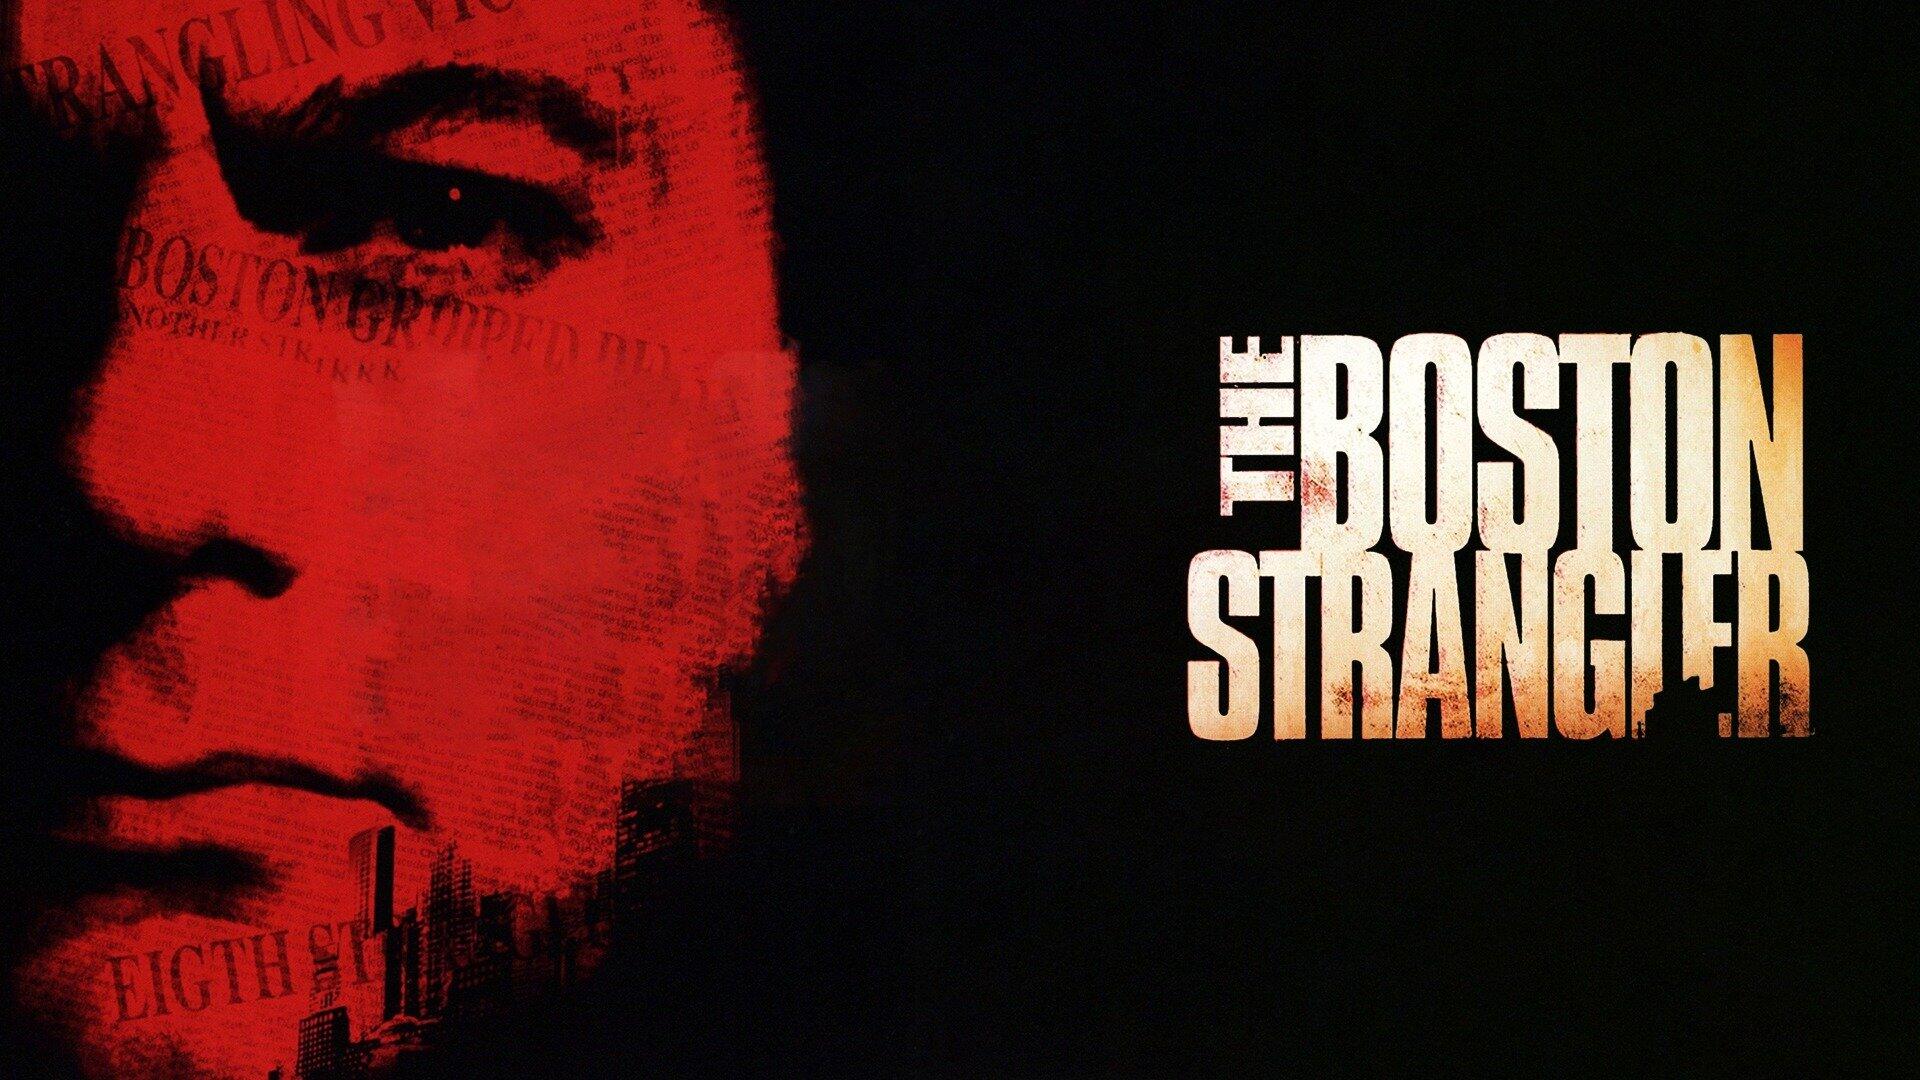 33-facts-about-the-movie-the-boston-strangler